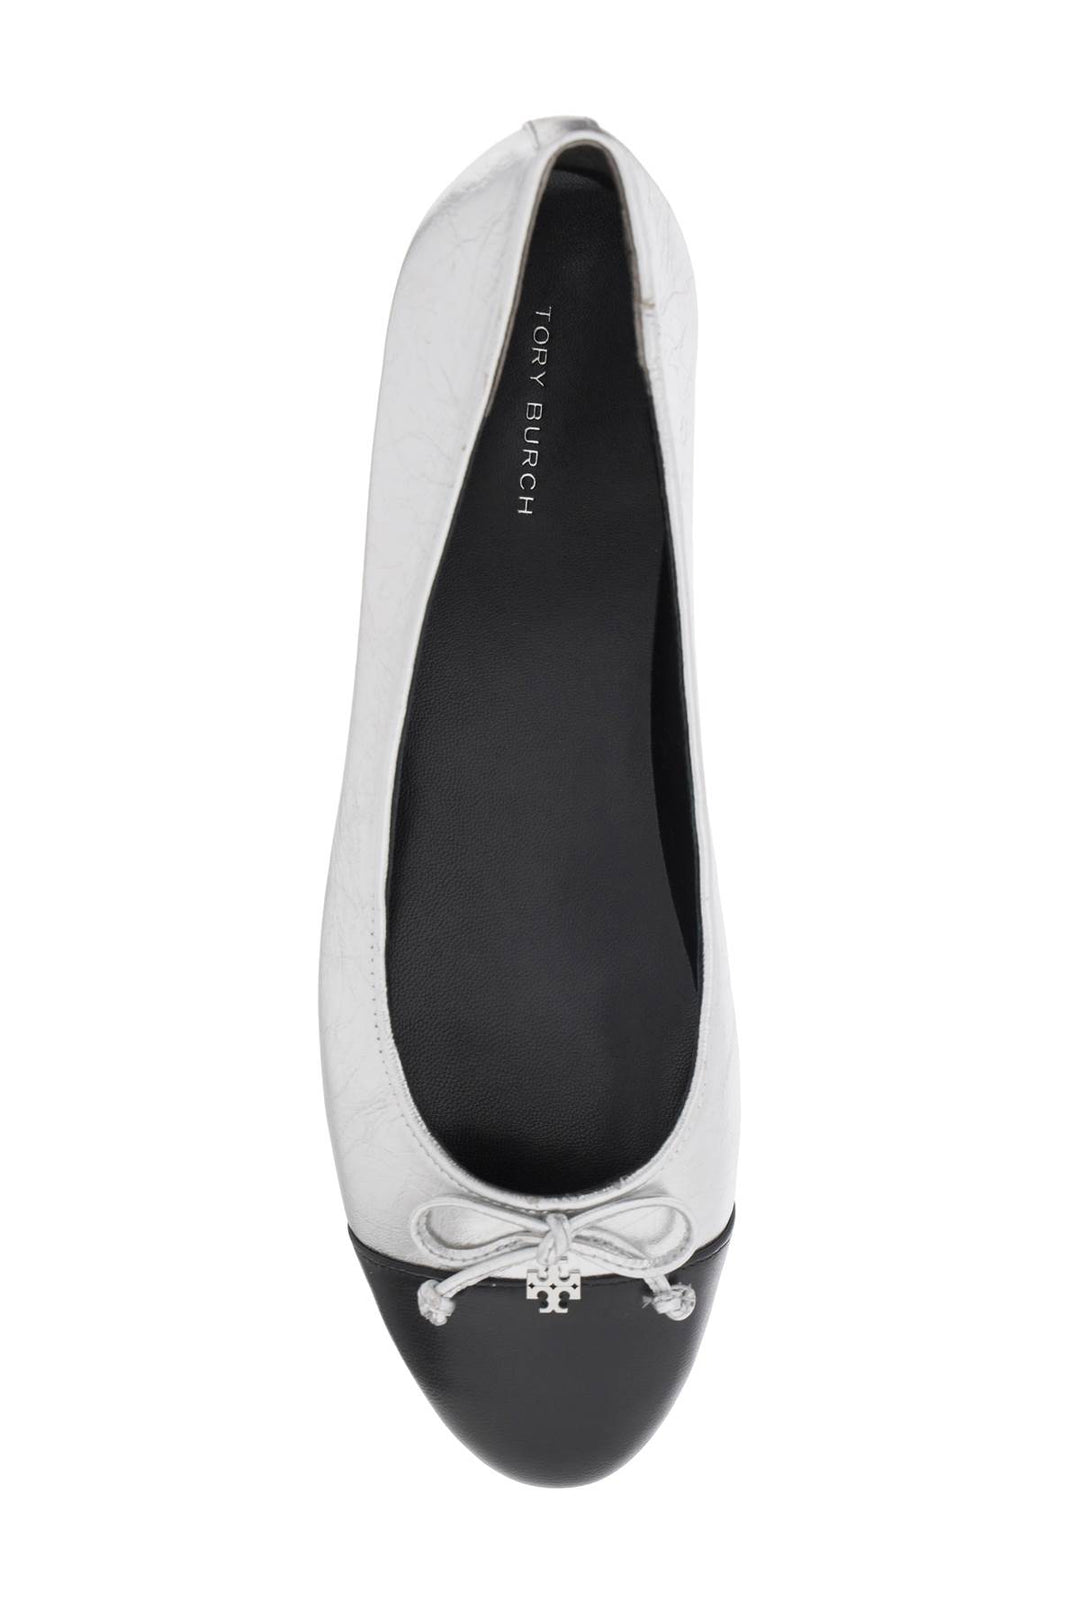 Tory Burch Laminated Ballet Flats With Contrasting Toe   Argento